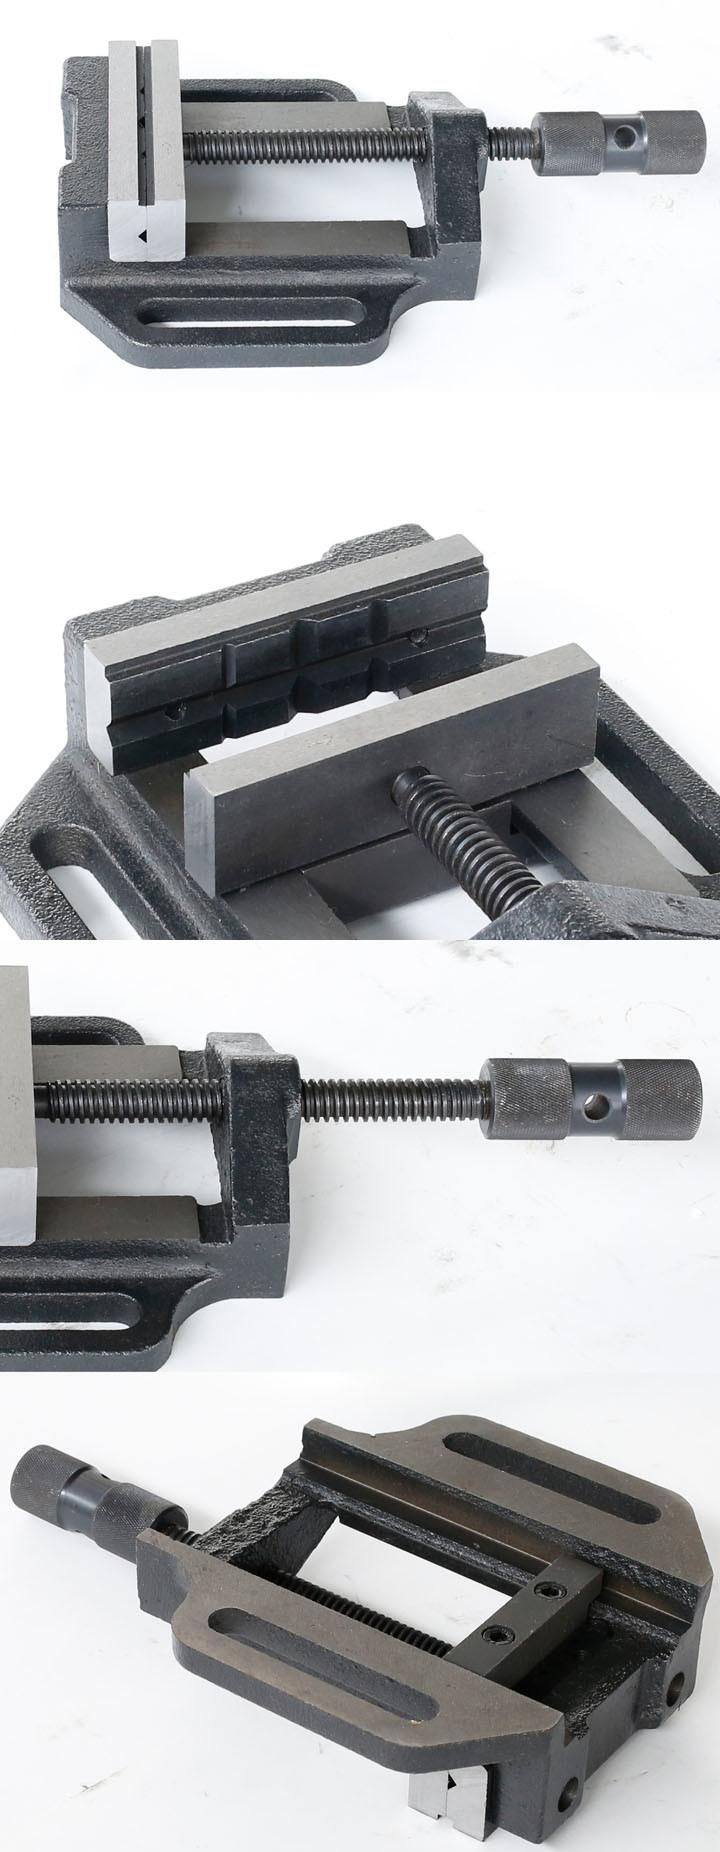 Drill Press Vise for Easy Clamping on Drill Presses